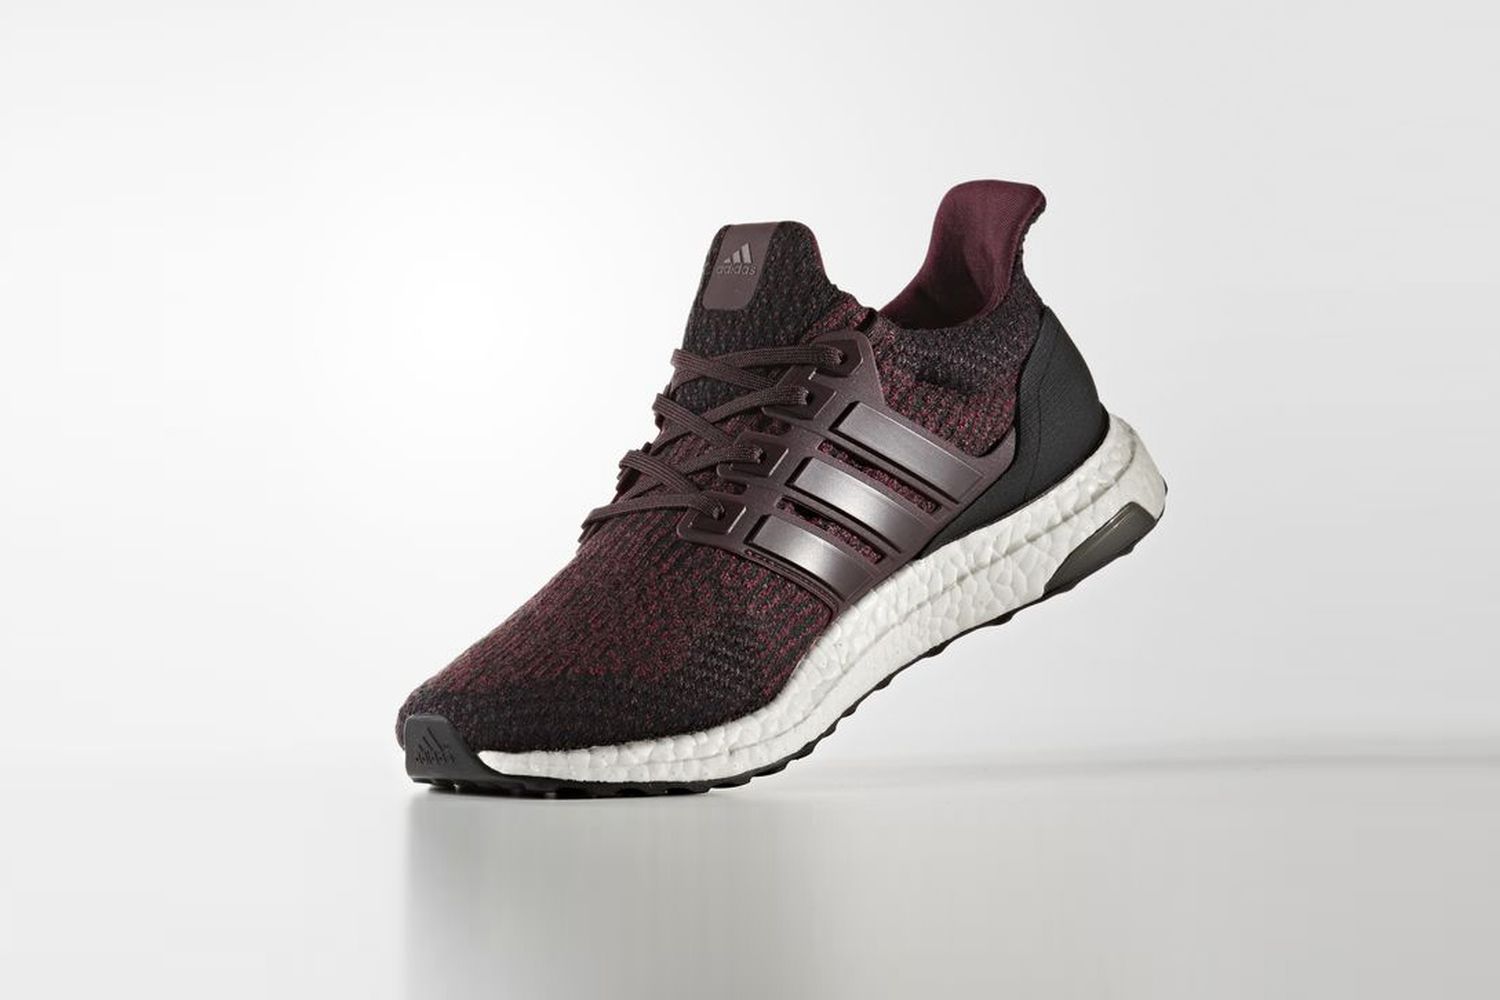 adidas Ultra Boost 4.0 Chinese New Year: Release Date, Price & More Info